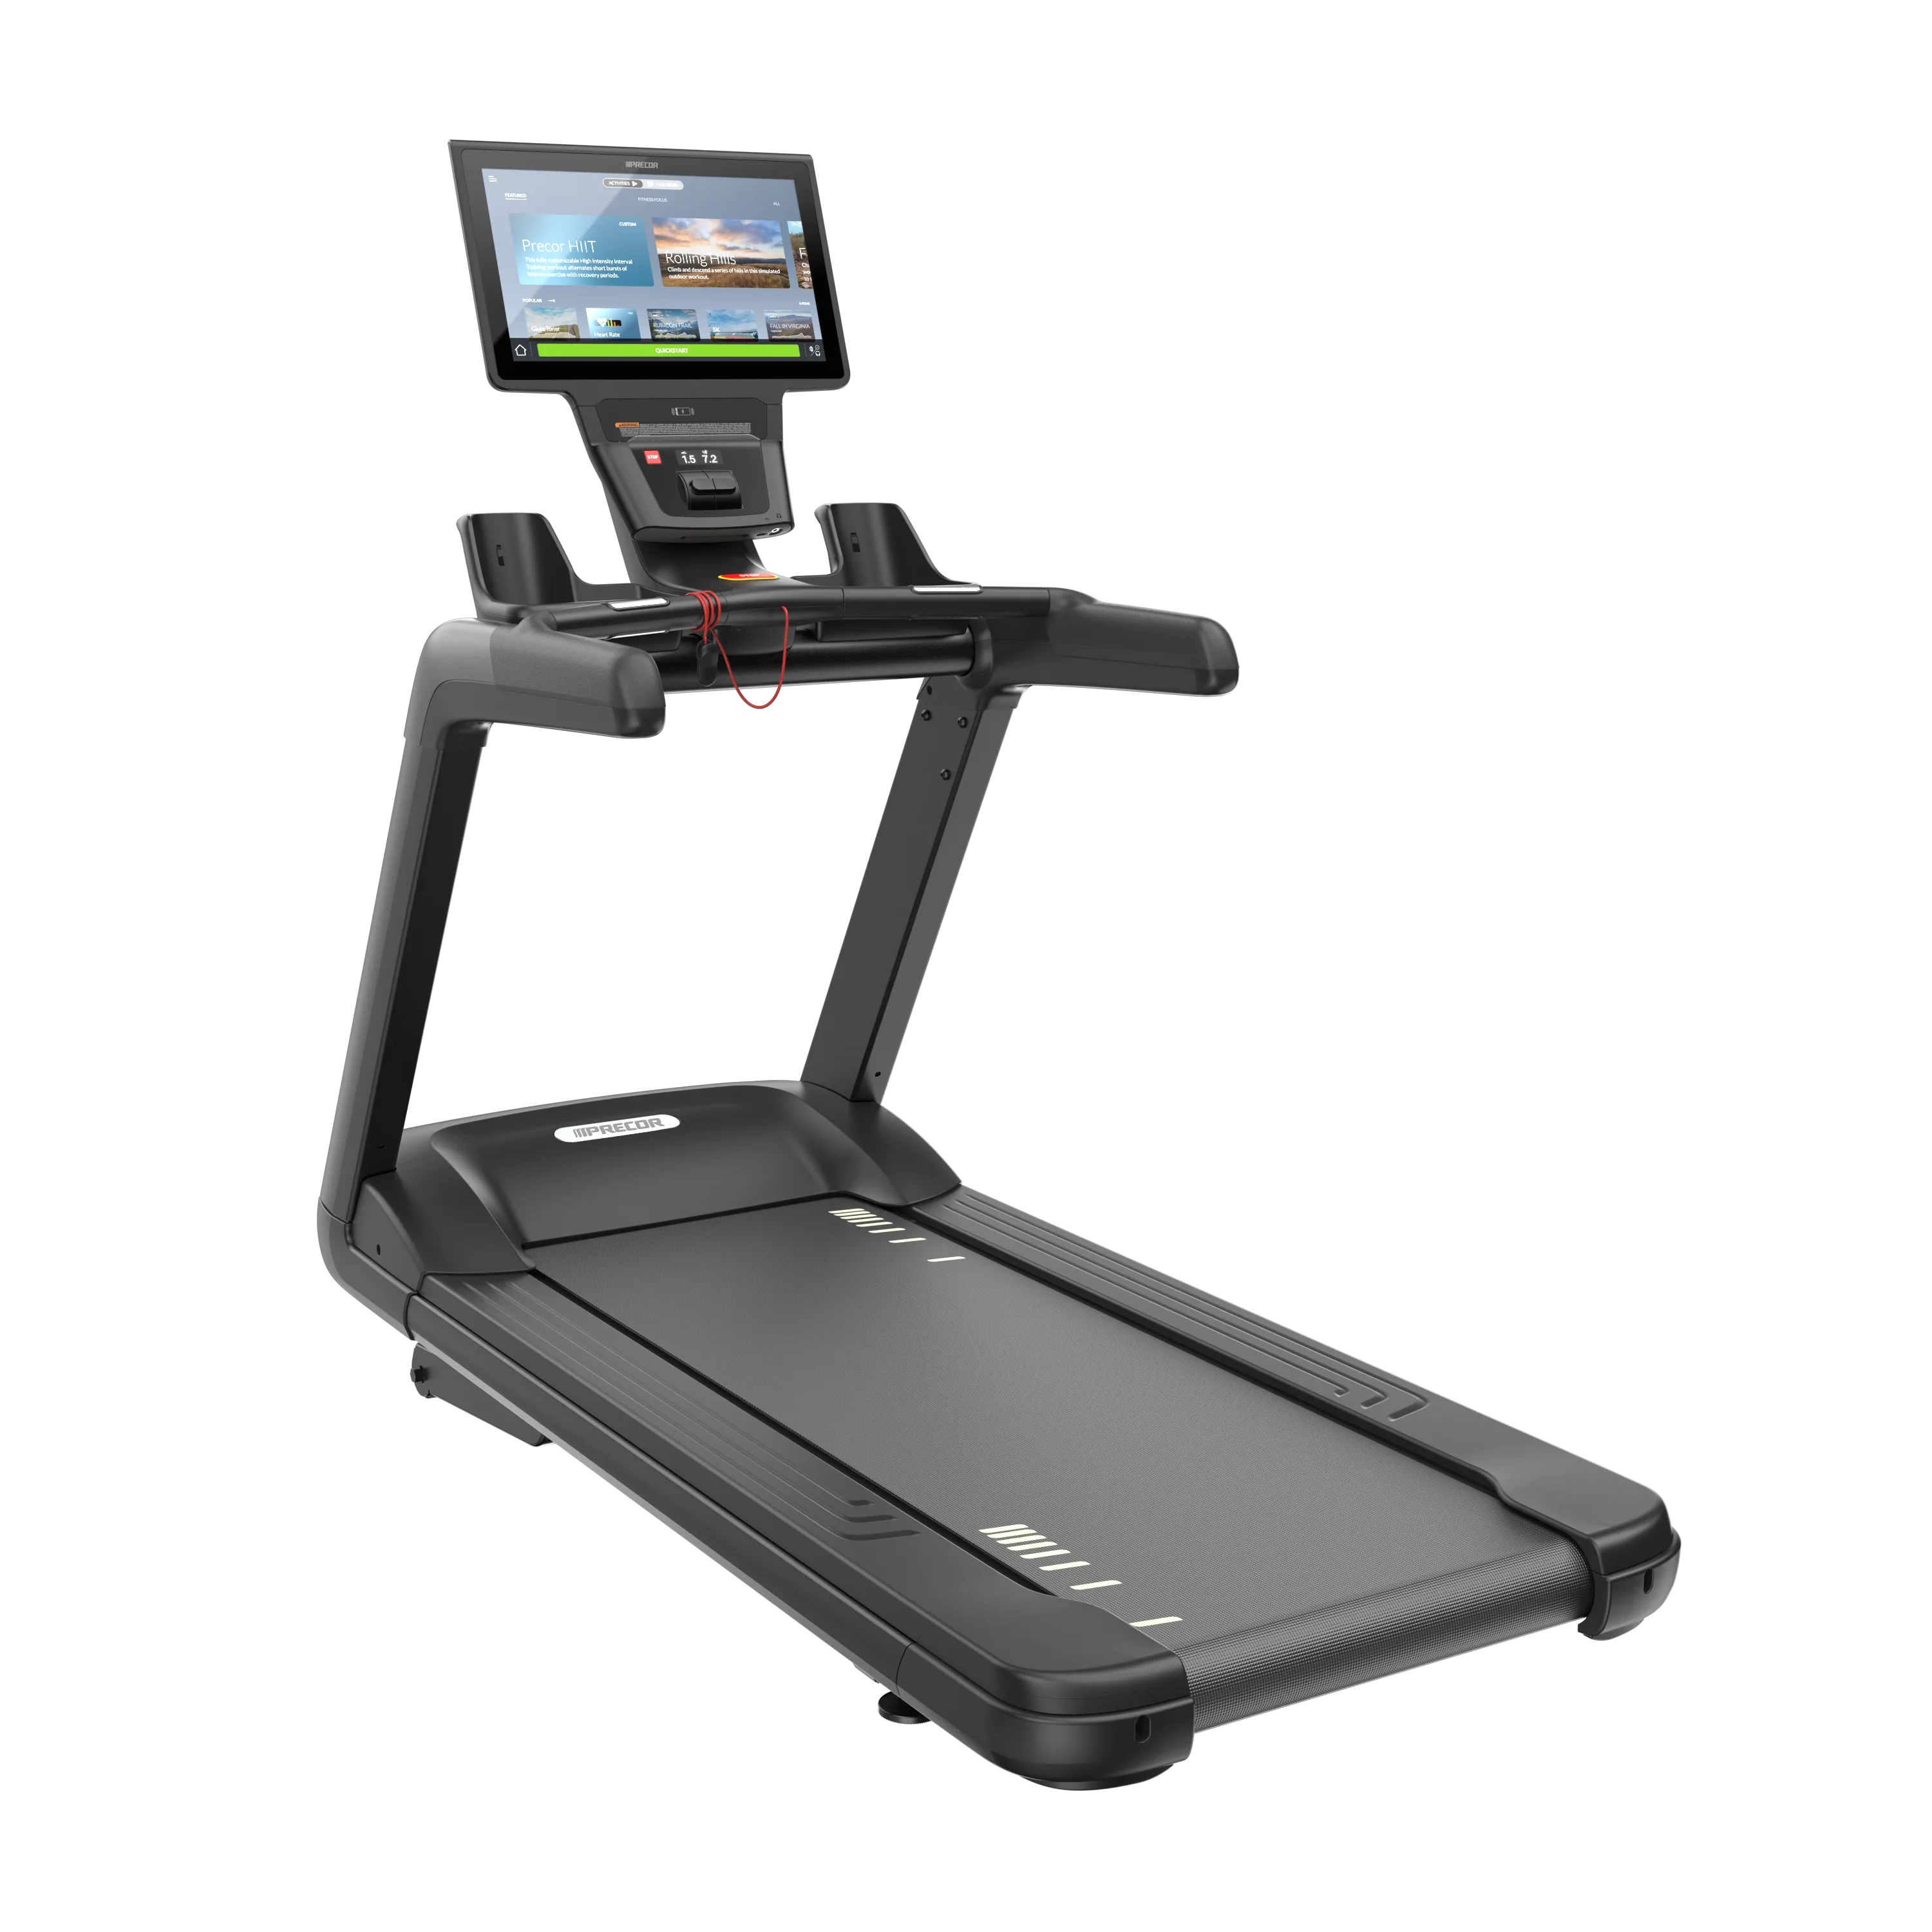 Treadmill 700 line with P94 touchscreen console